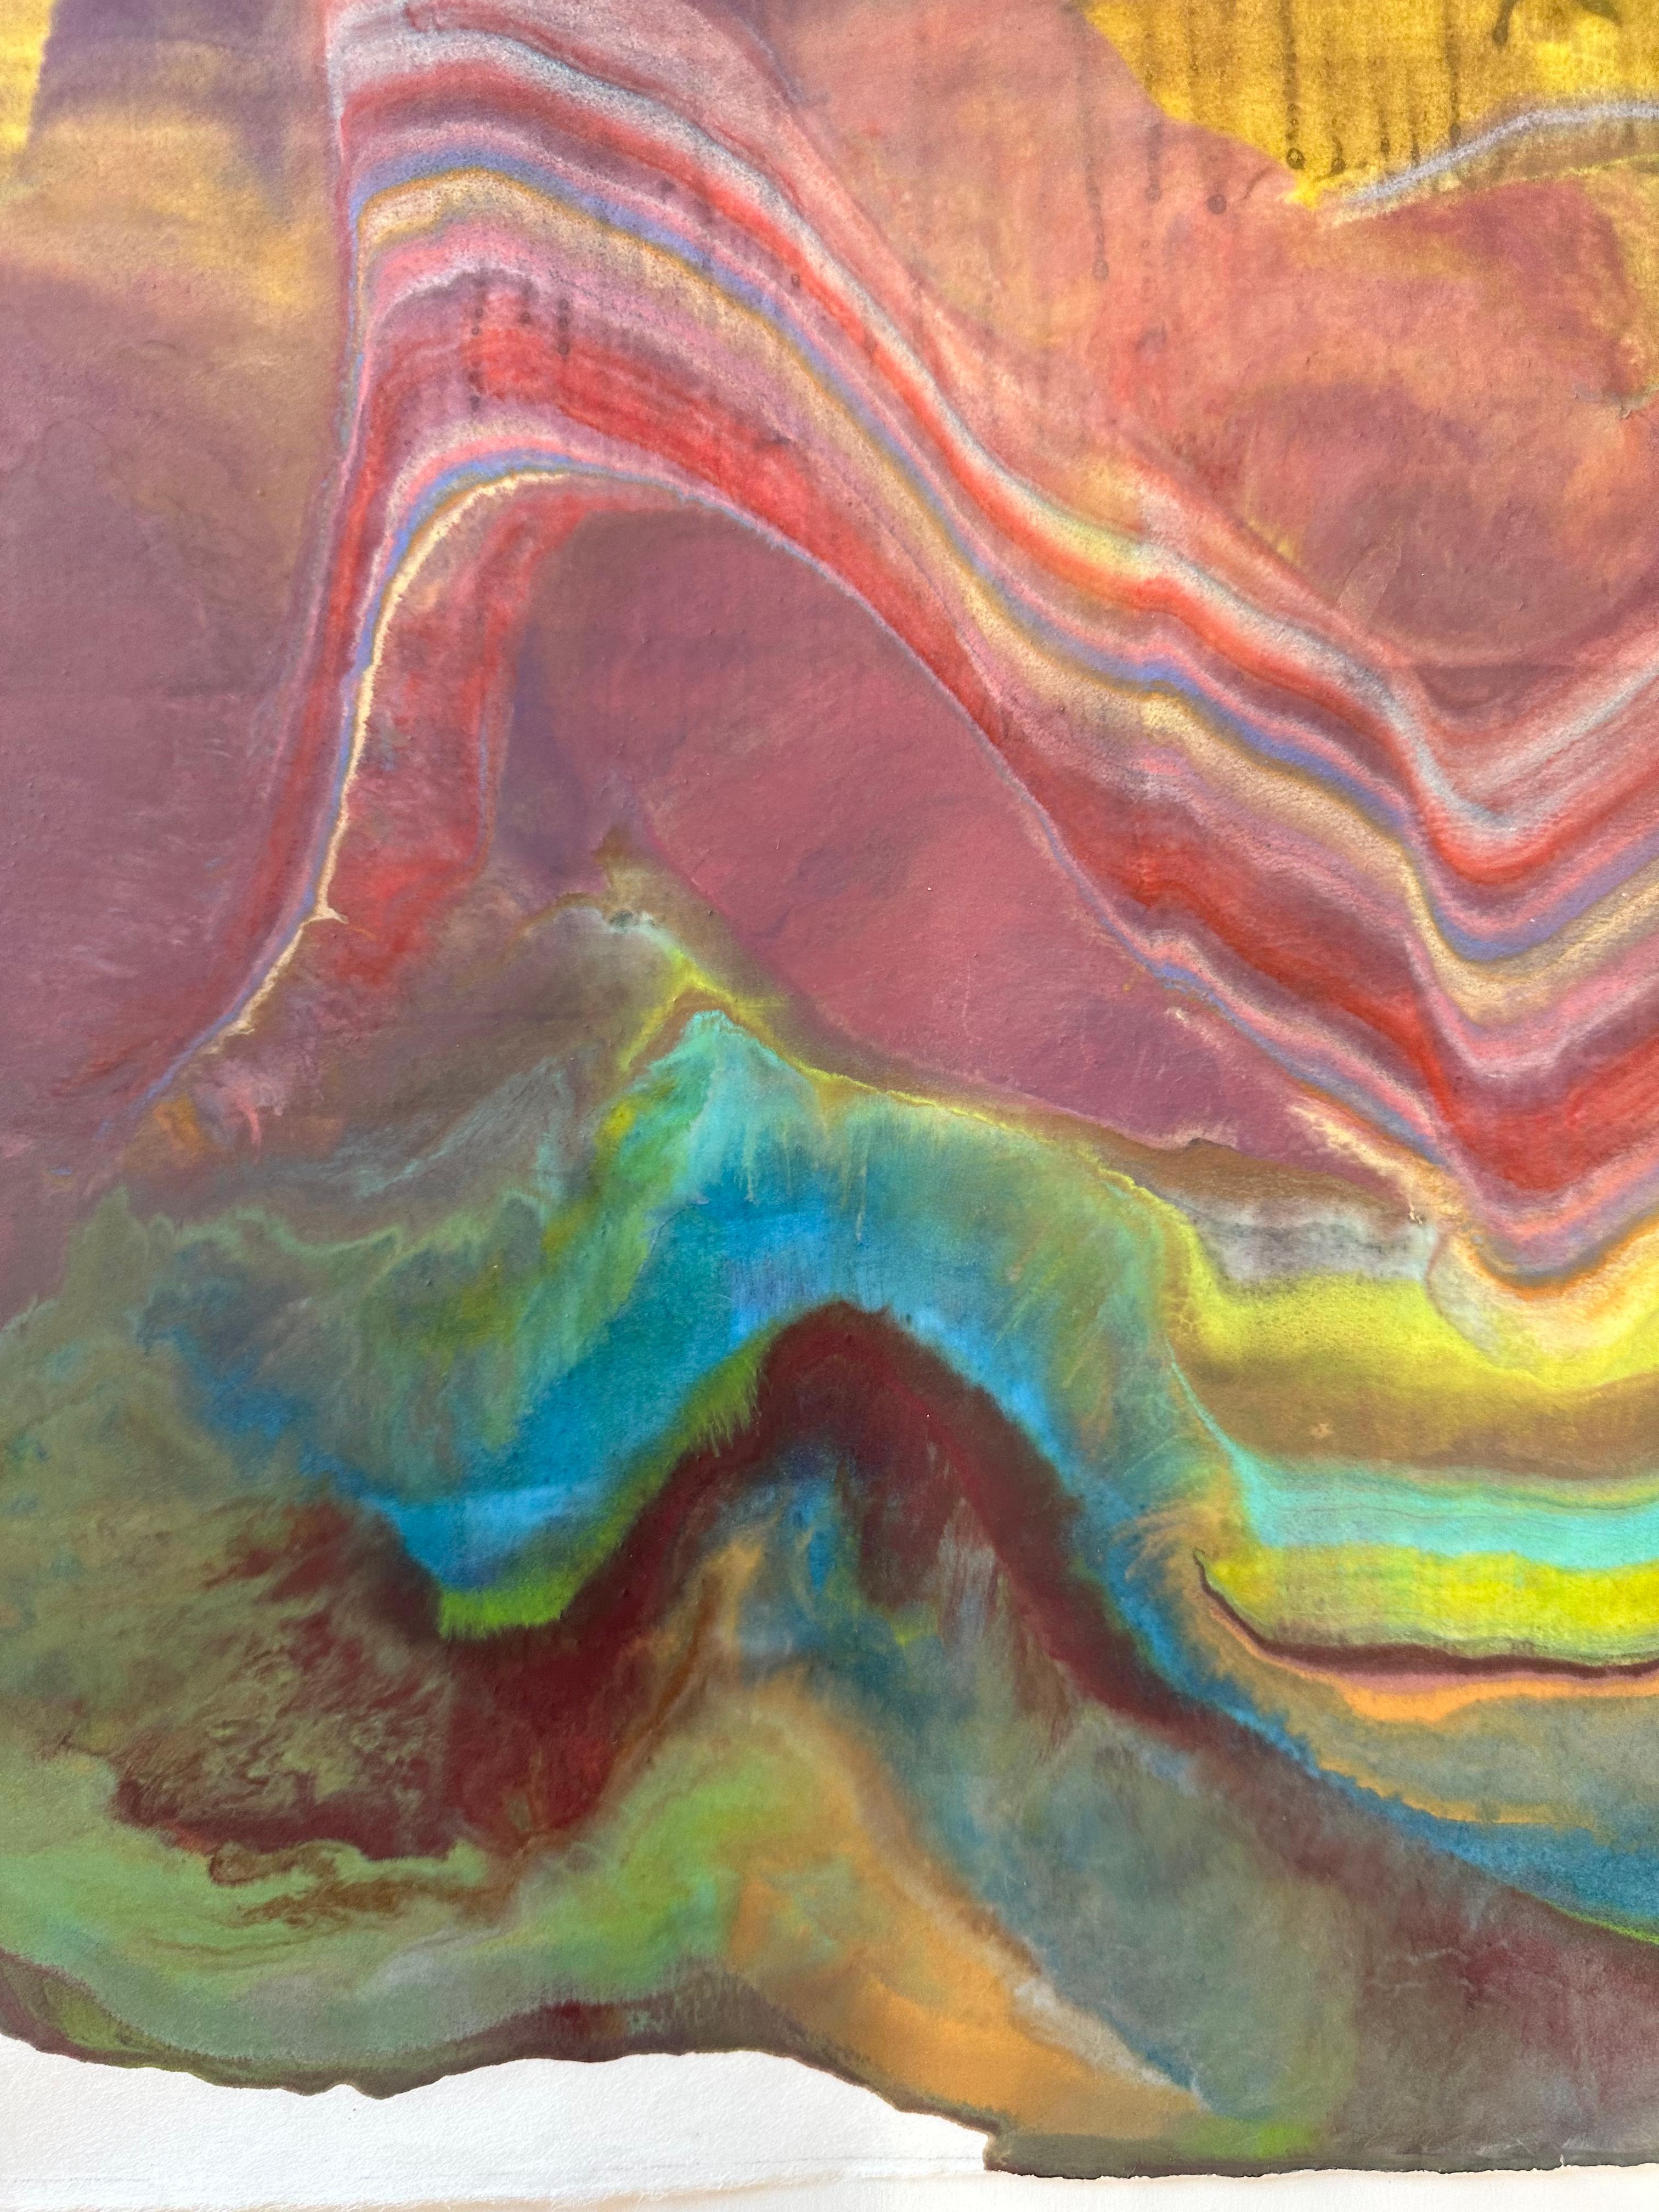 Layers of pigmented beeswax on lightweight paper create an undulating composition suggesting layers of the earth's crust and geological formations depicted light pink, green, yellow, teal blue, salmon, dusty rose, brown, and ochre.

Laura Moriarty